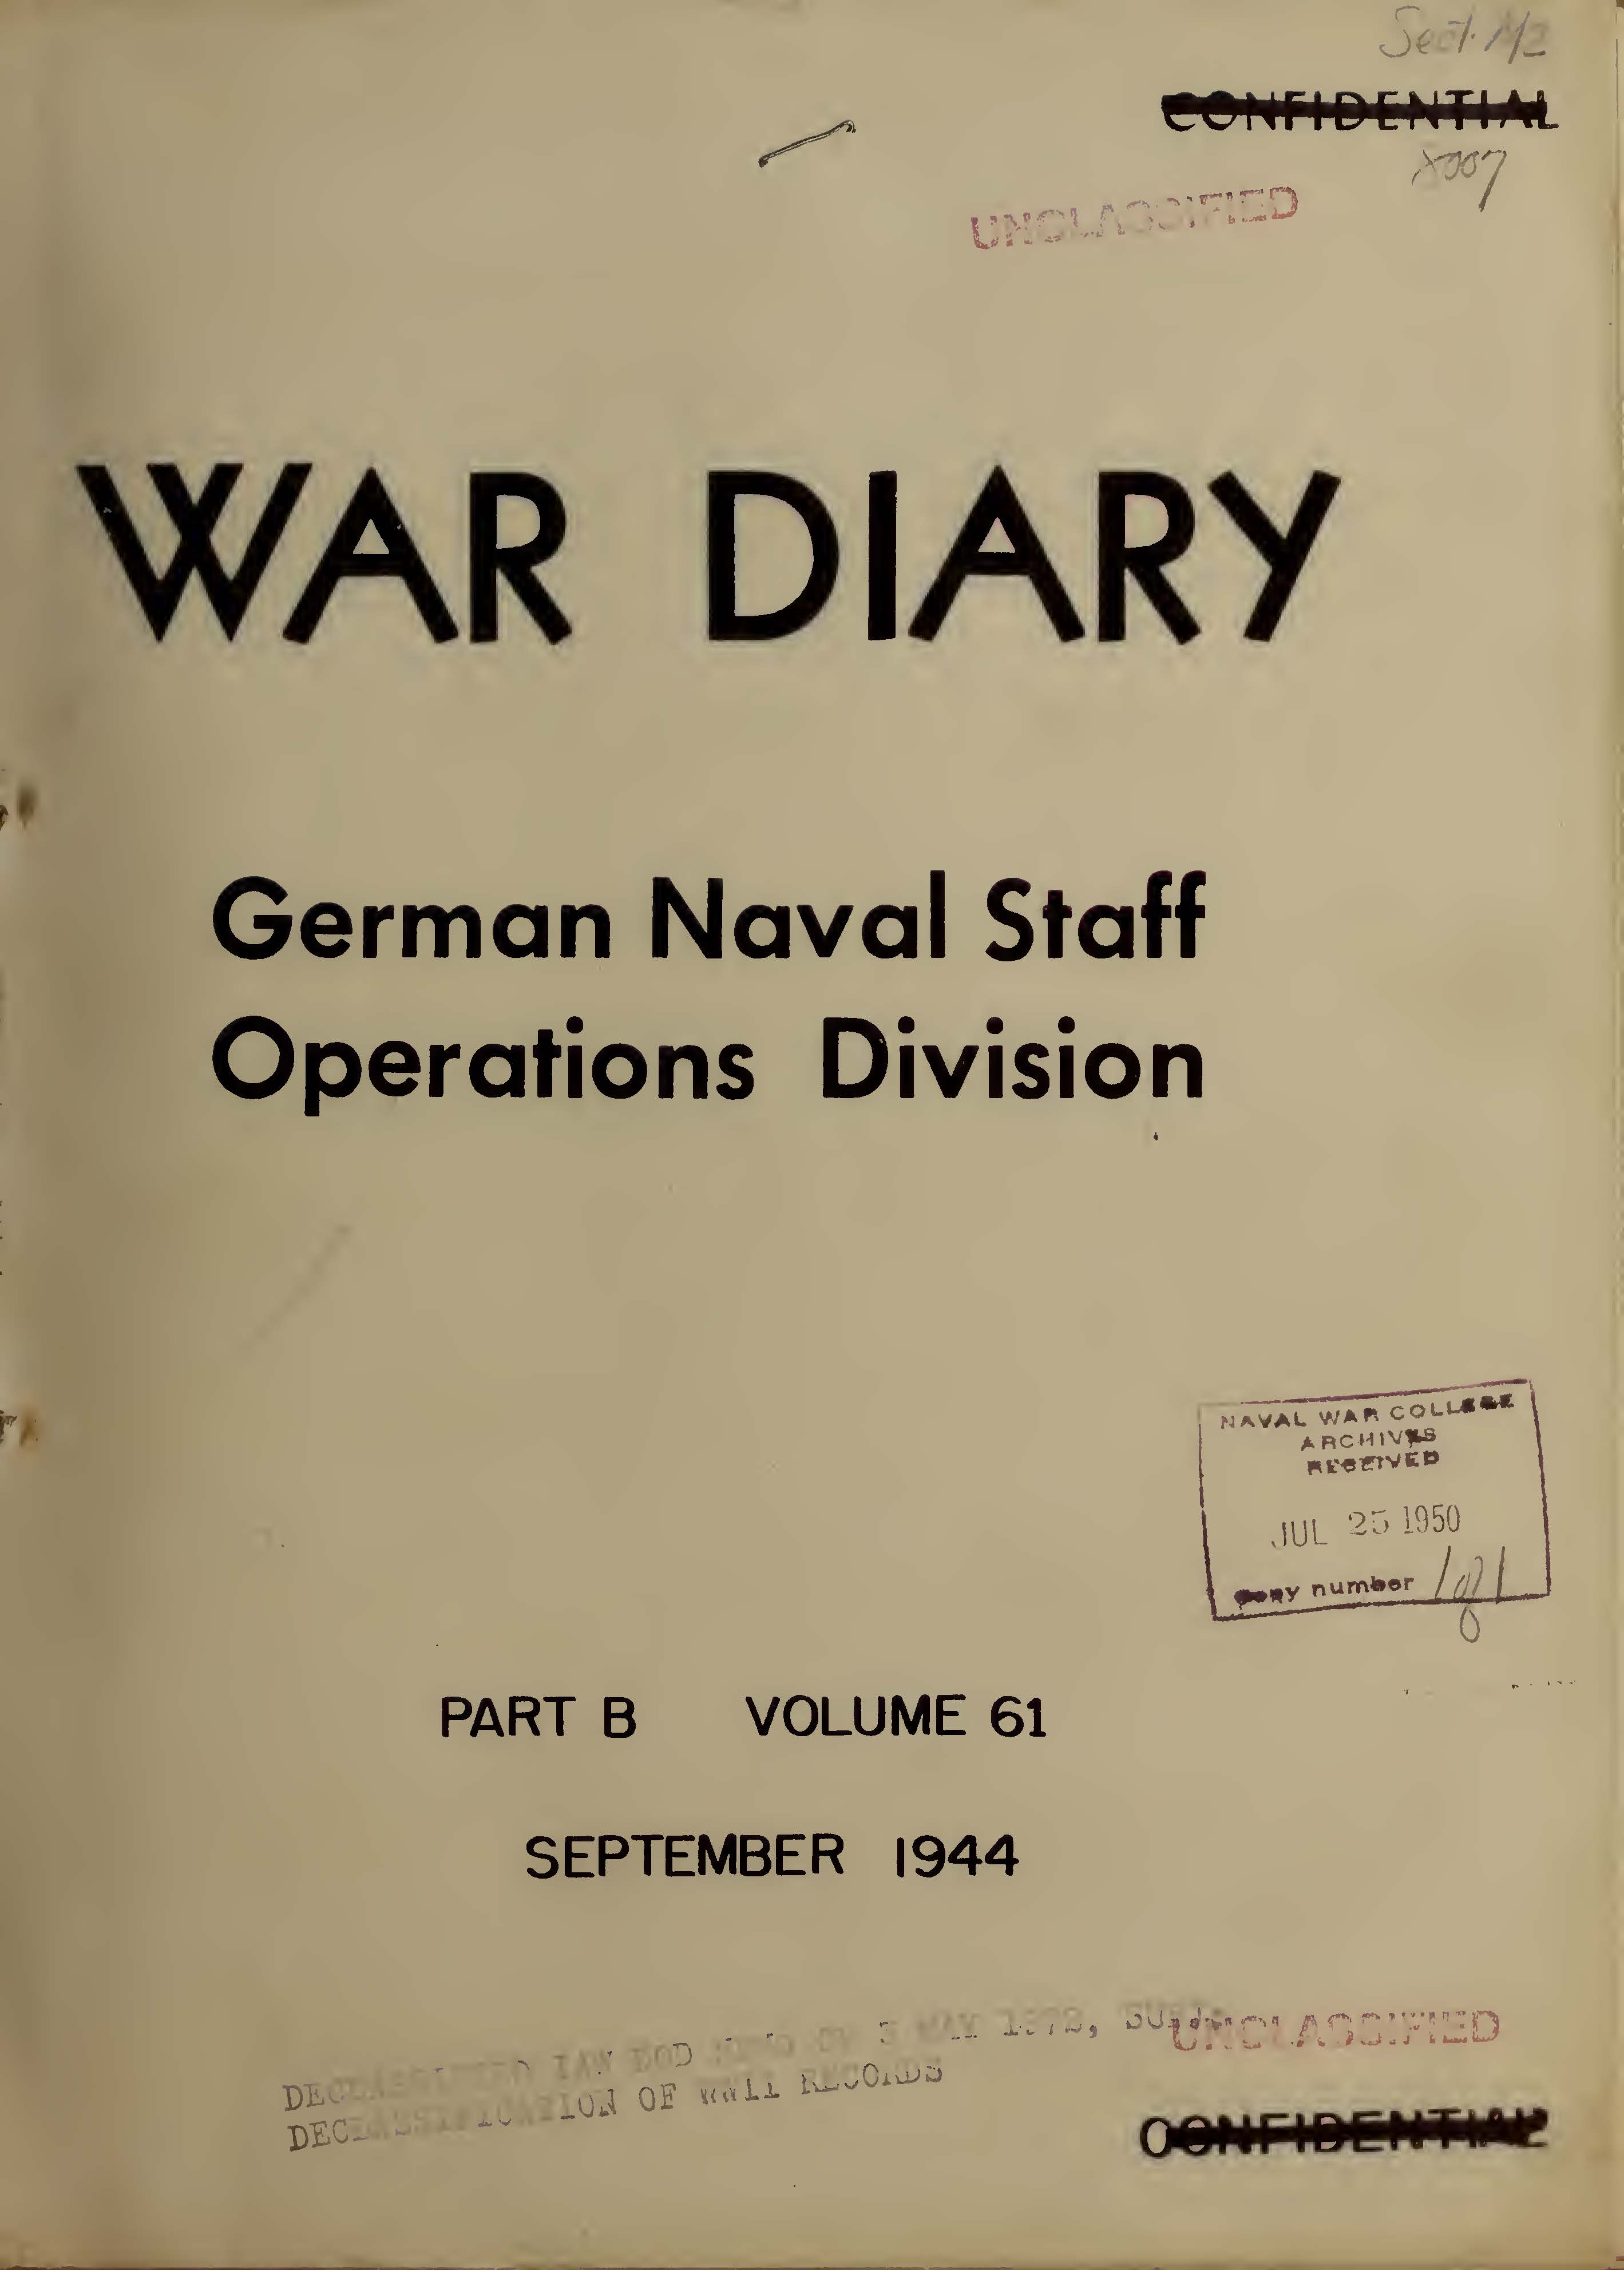 War Diary of German Naval Staff (Operations Division) Part B, Volume 61, September 1944